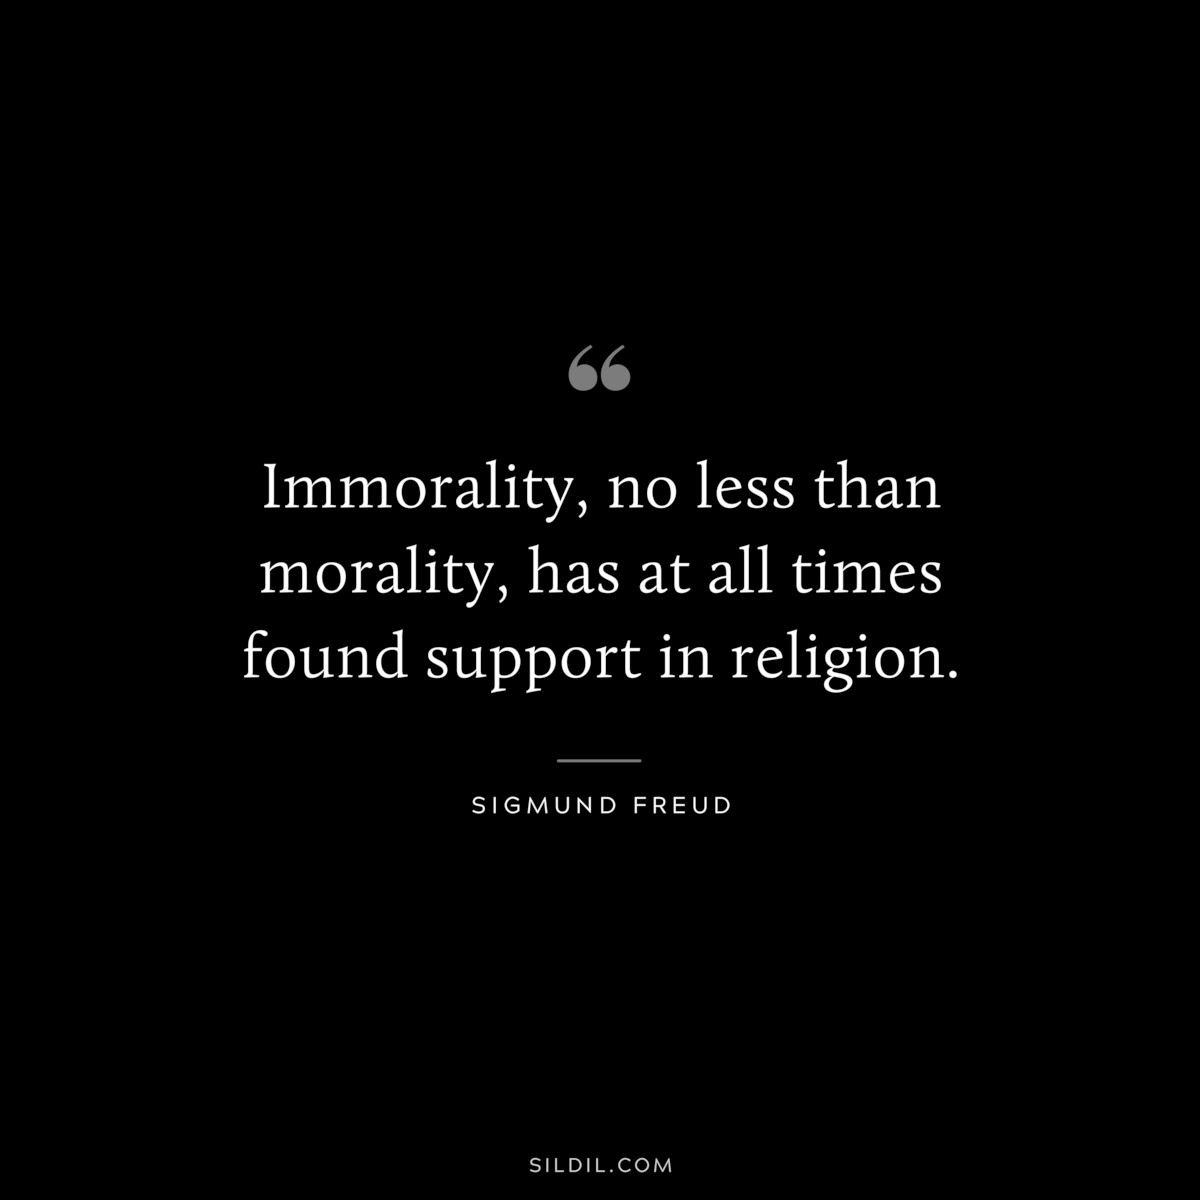 Immorality, no less than morality, has at all times found support in religion. ― Sigmund Frued